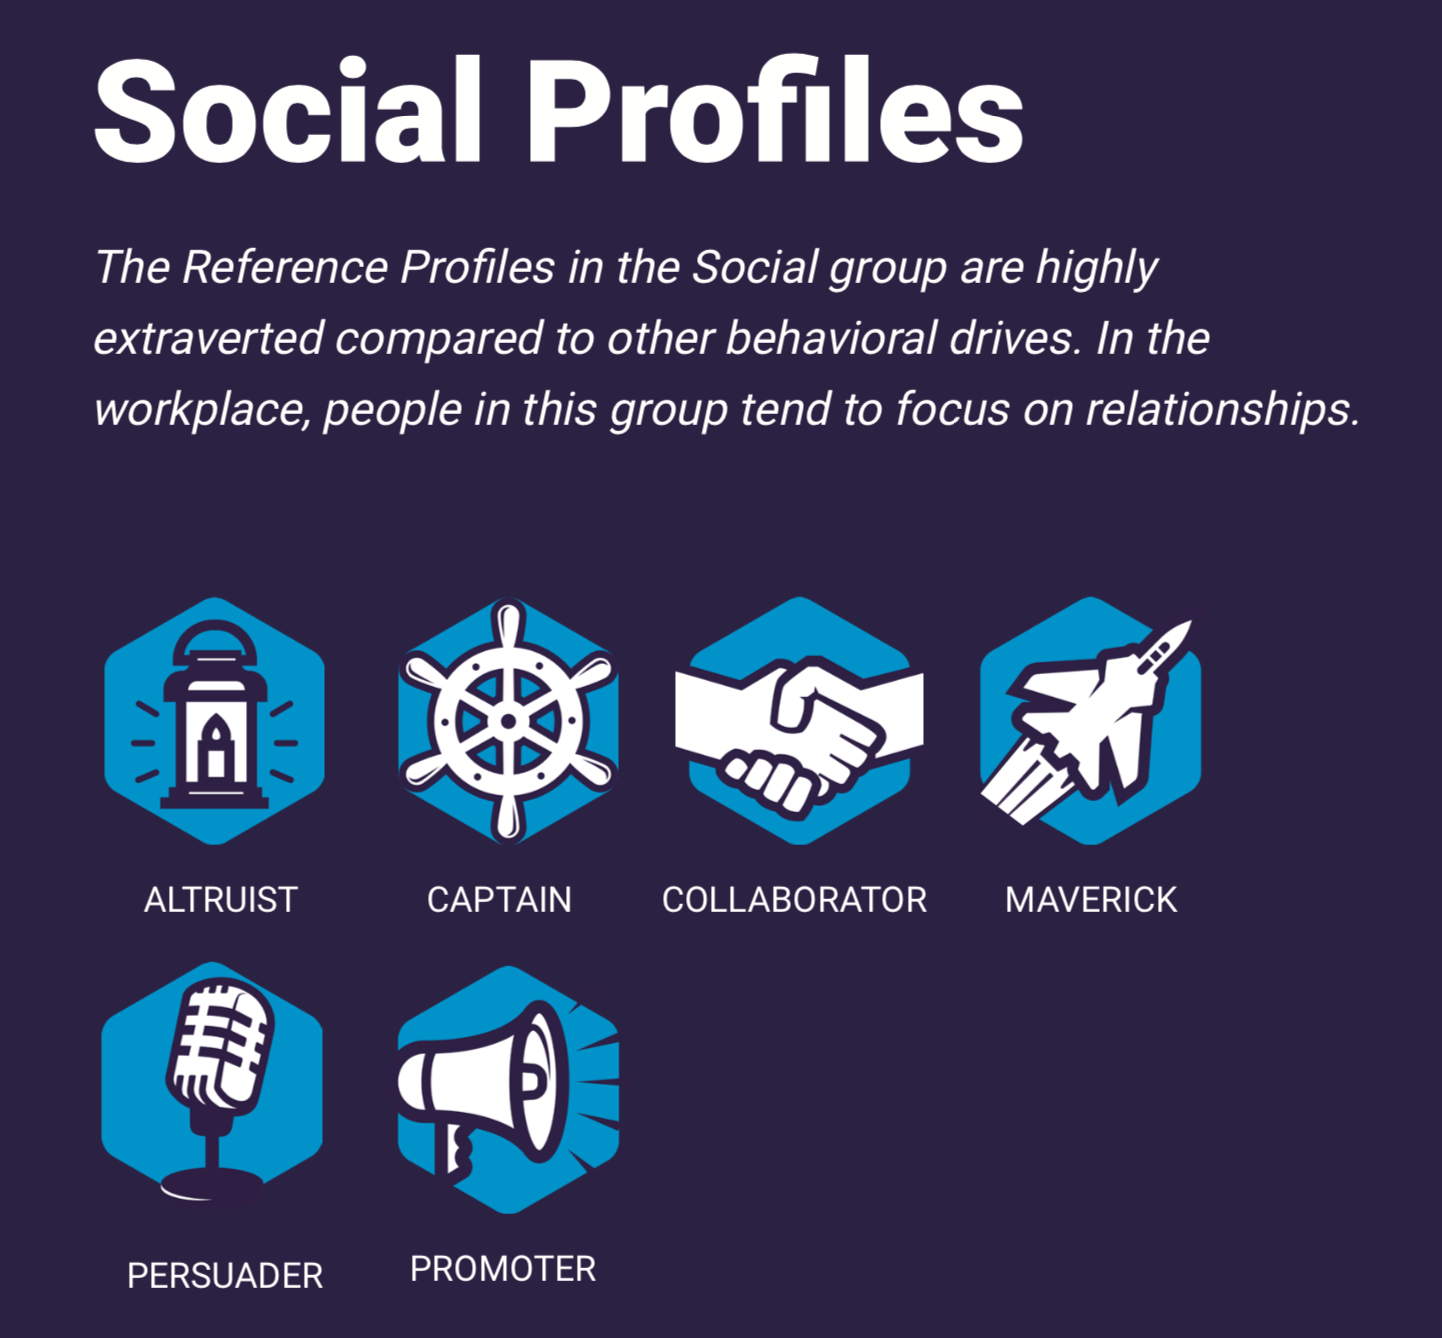 When hiring a sales BDR, look for someone with a social profile.